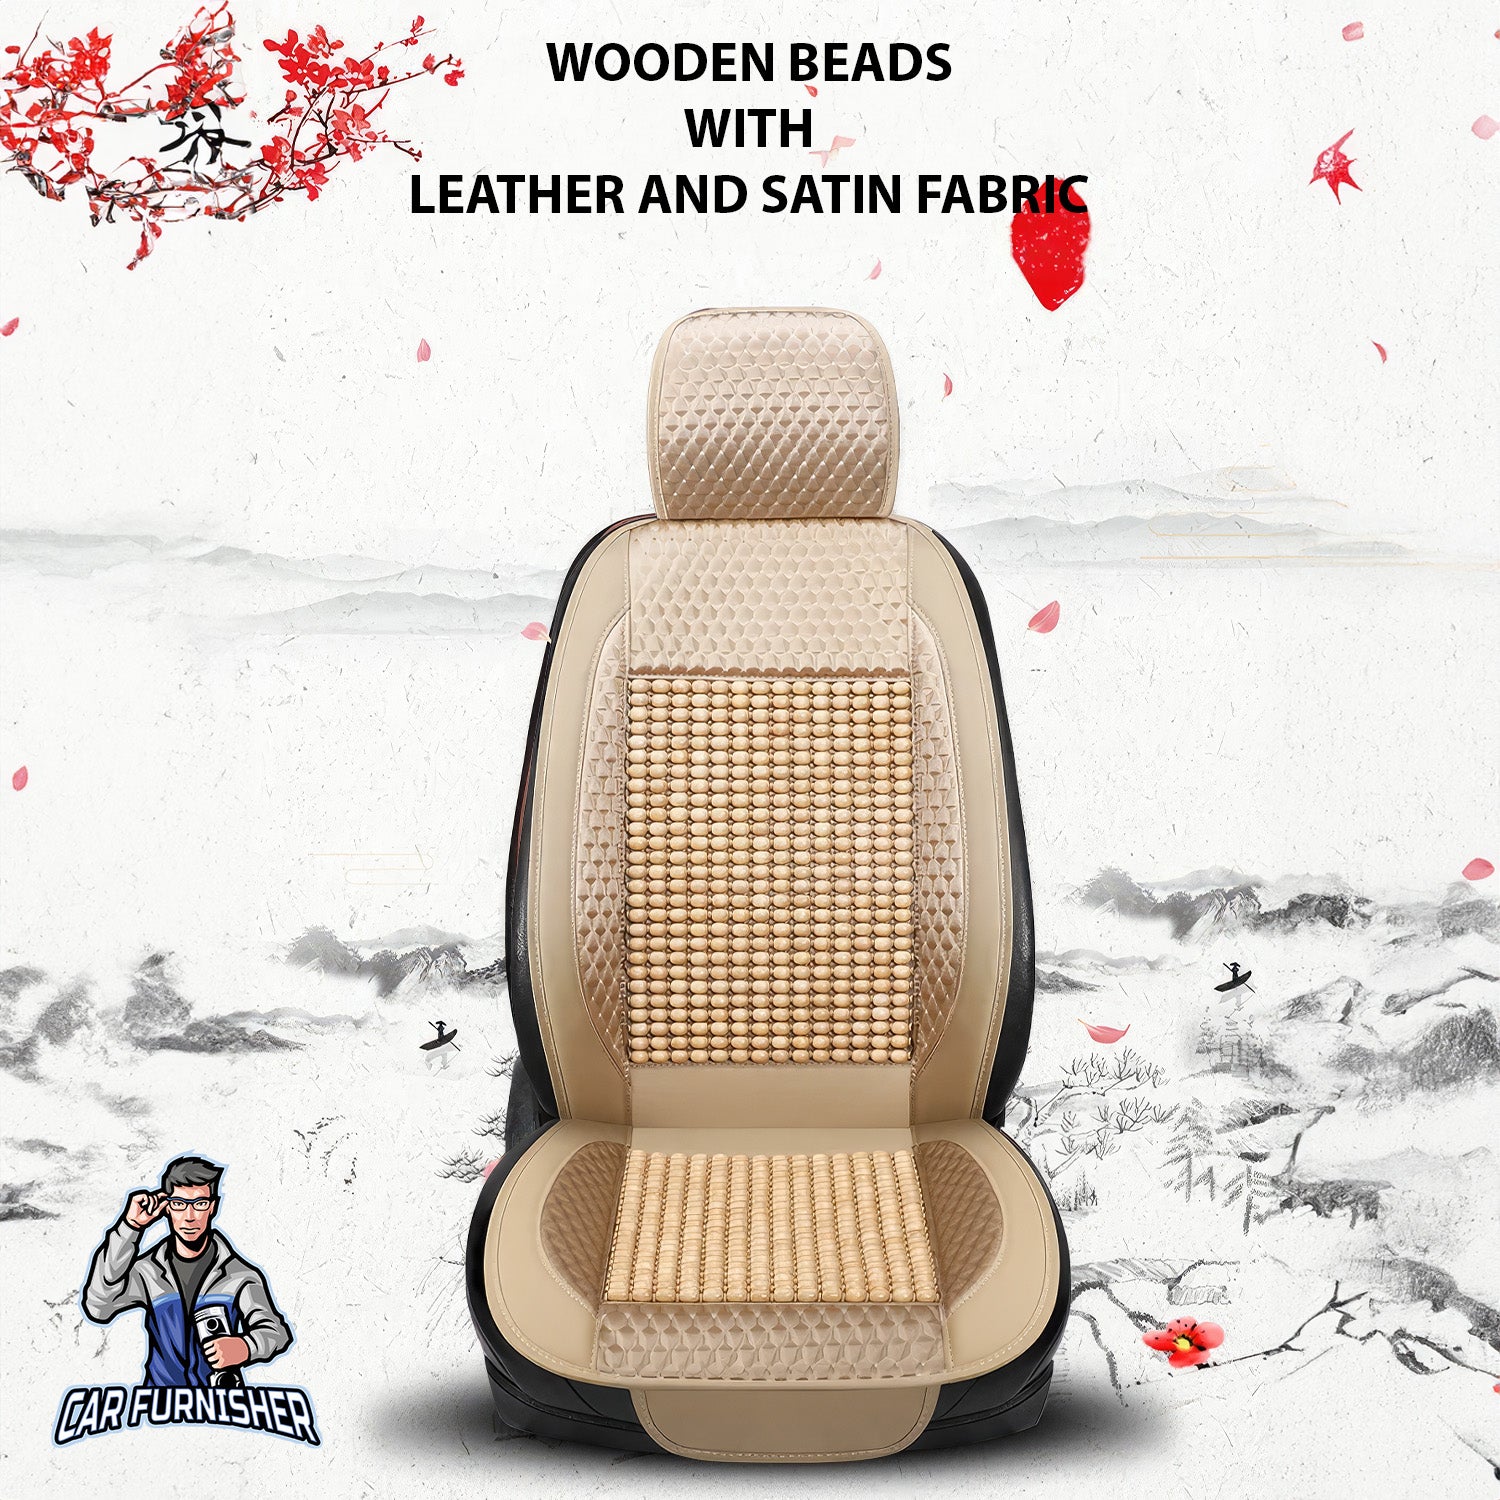 Car Seat Cover - Natural Wooden Beads (3 Colors) Beige Single Seat (1 pcs) Wood